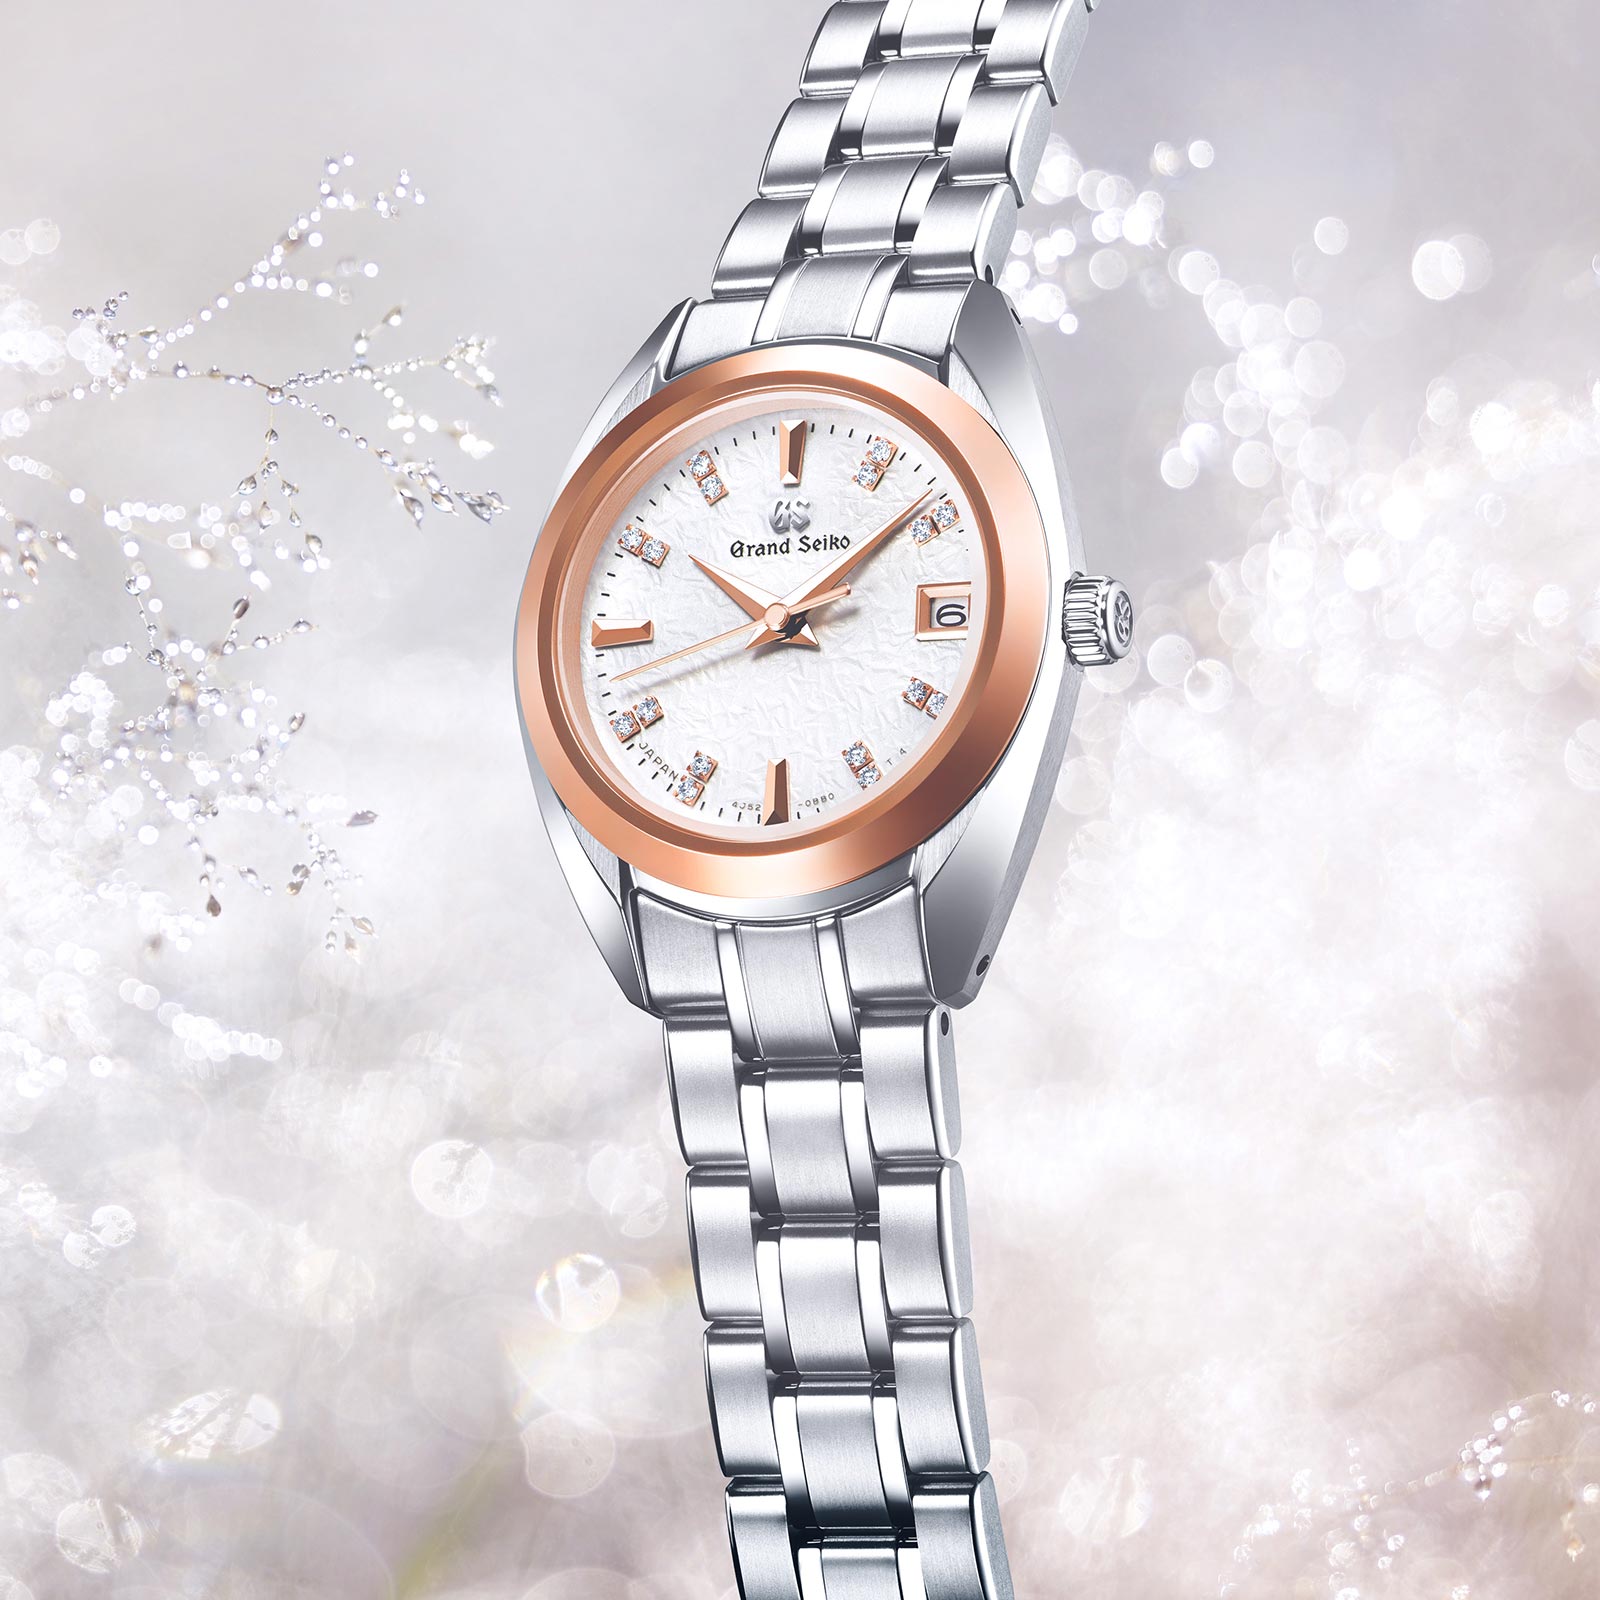 Ladies Grand Seiko watch STGF374 with white diamond dial and High-Intensity Titanium case and bracelet and rose gold bezel. 